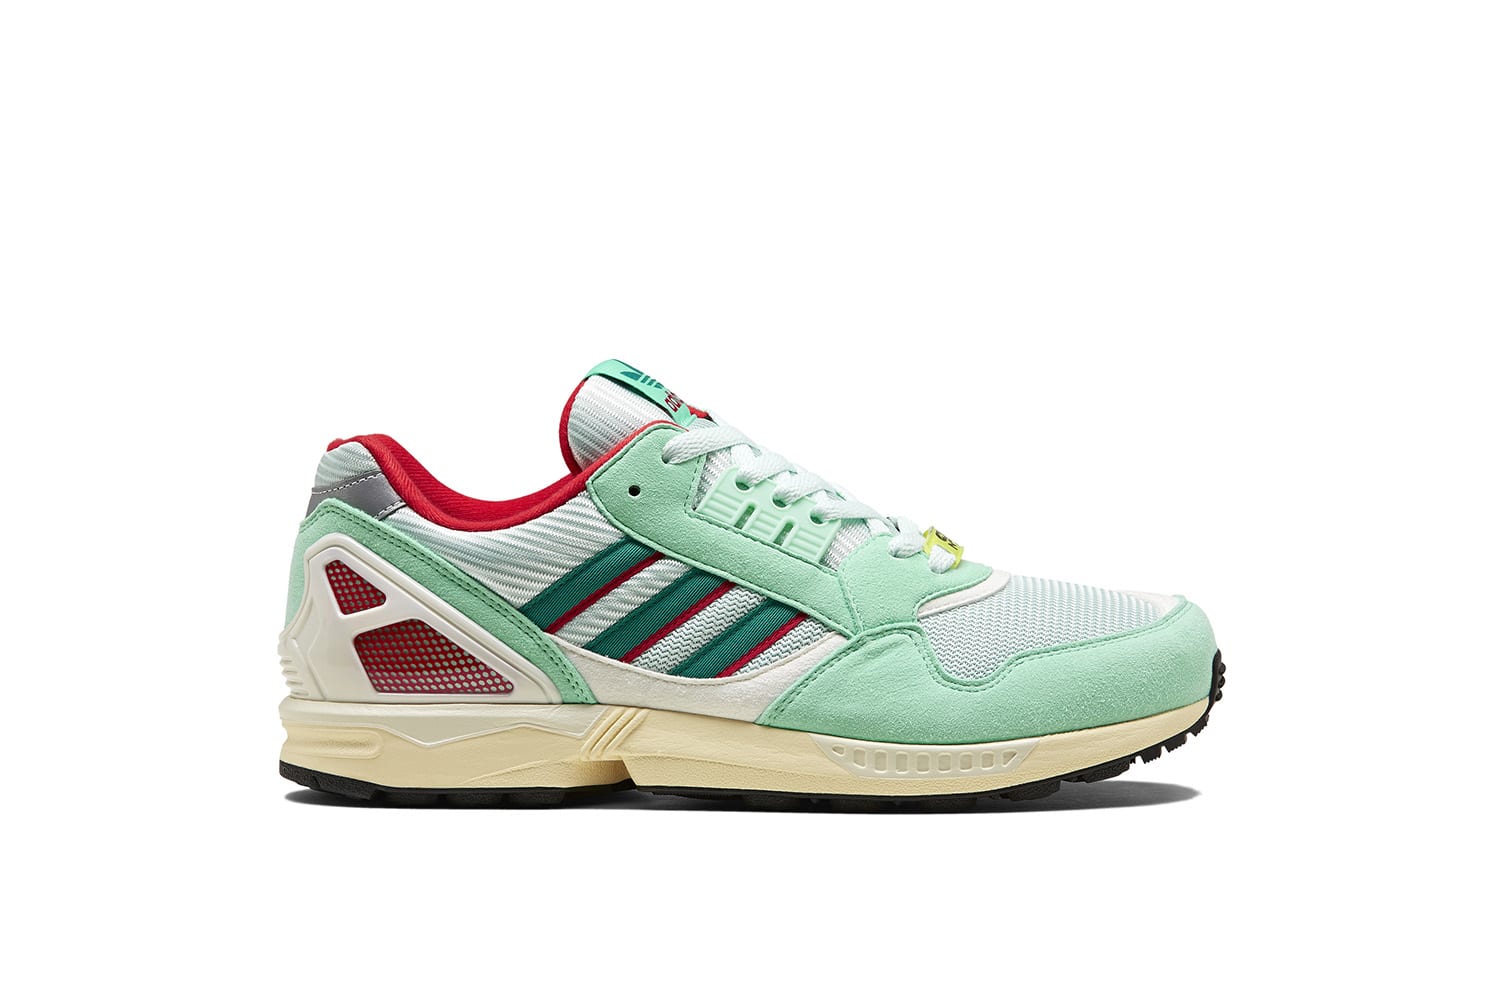 adidas ZX 9000 OG 30 years of Torsion 3